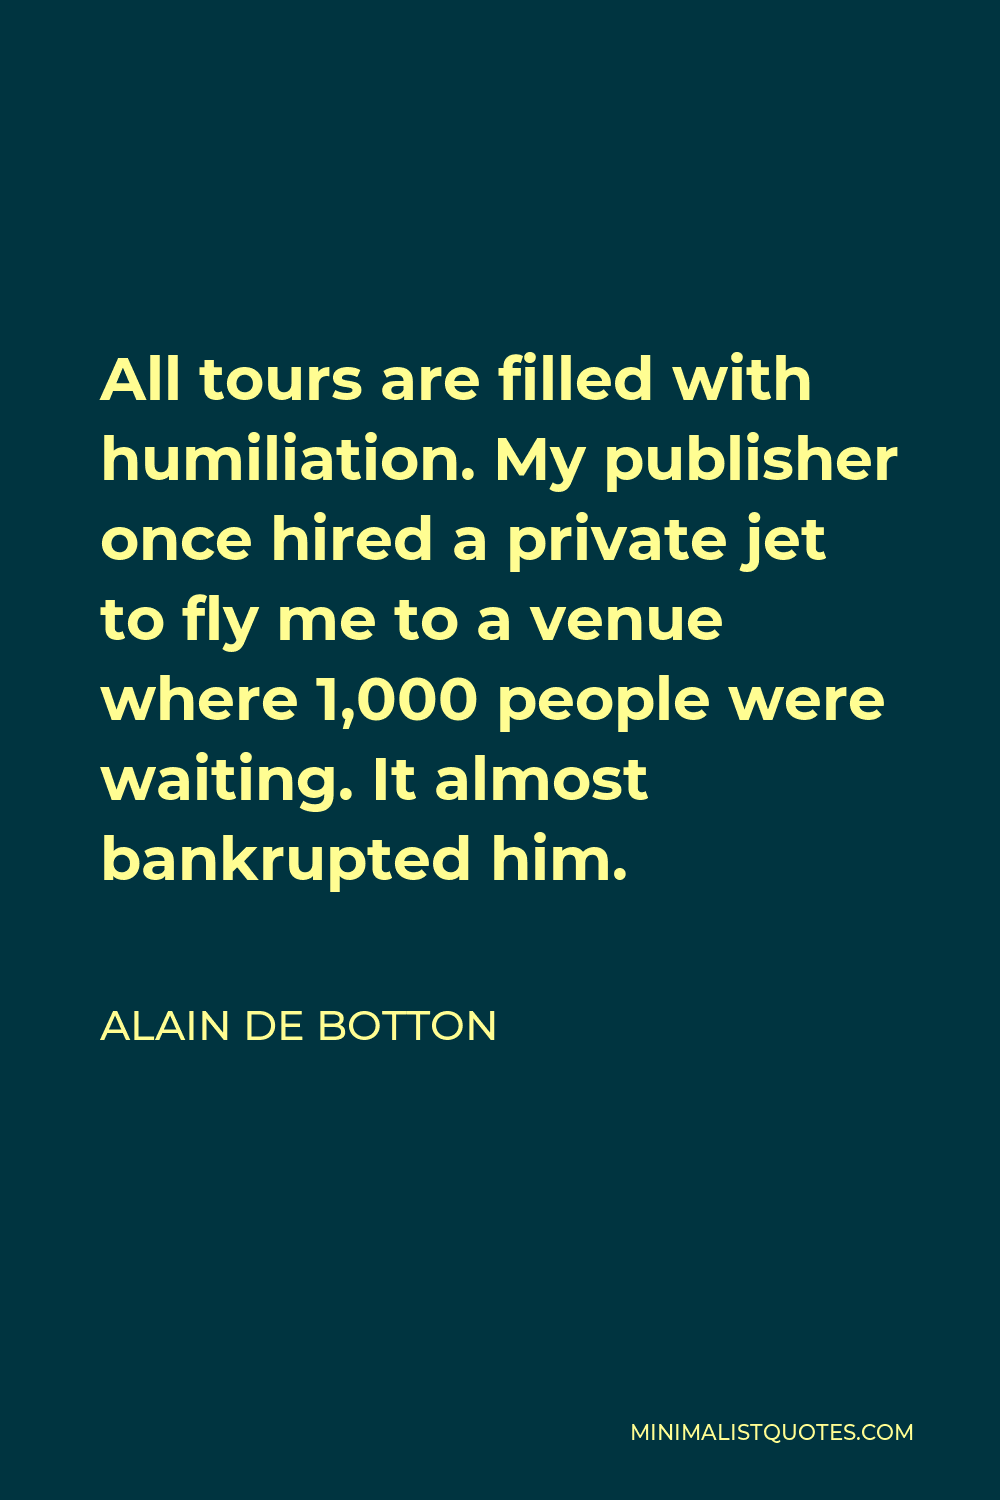 Alain de Botton Quote - All tours are filled with humiliation. My publisher once hired a private jet to fly me to a venue where 1,000 people were waiting. It almost bankrupted him.